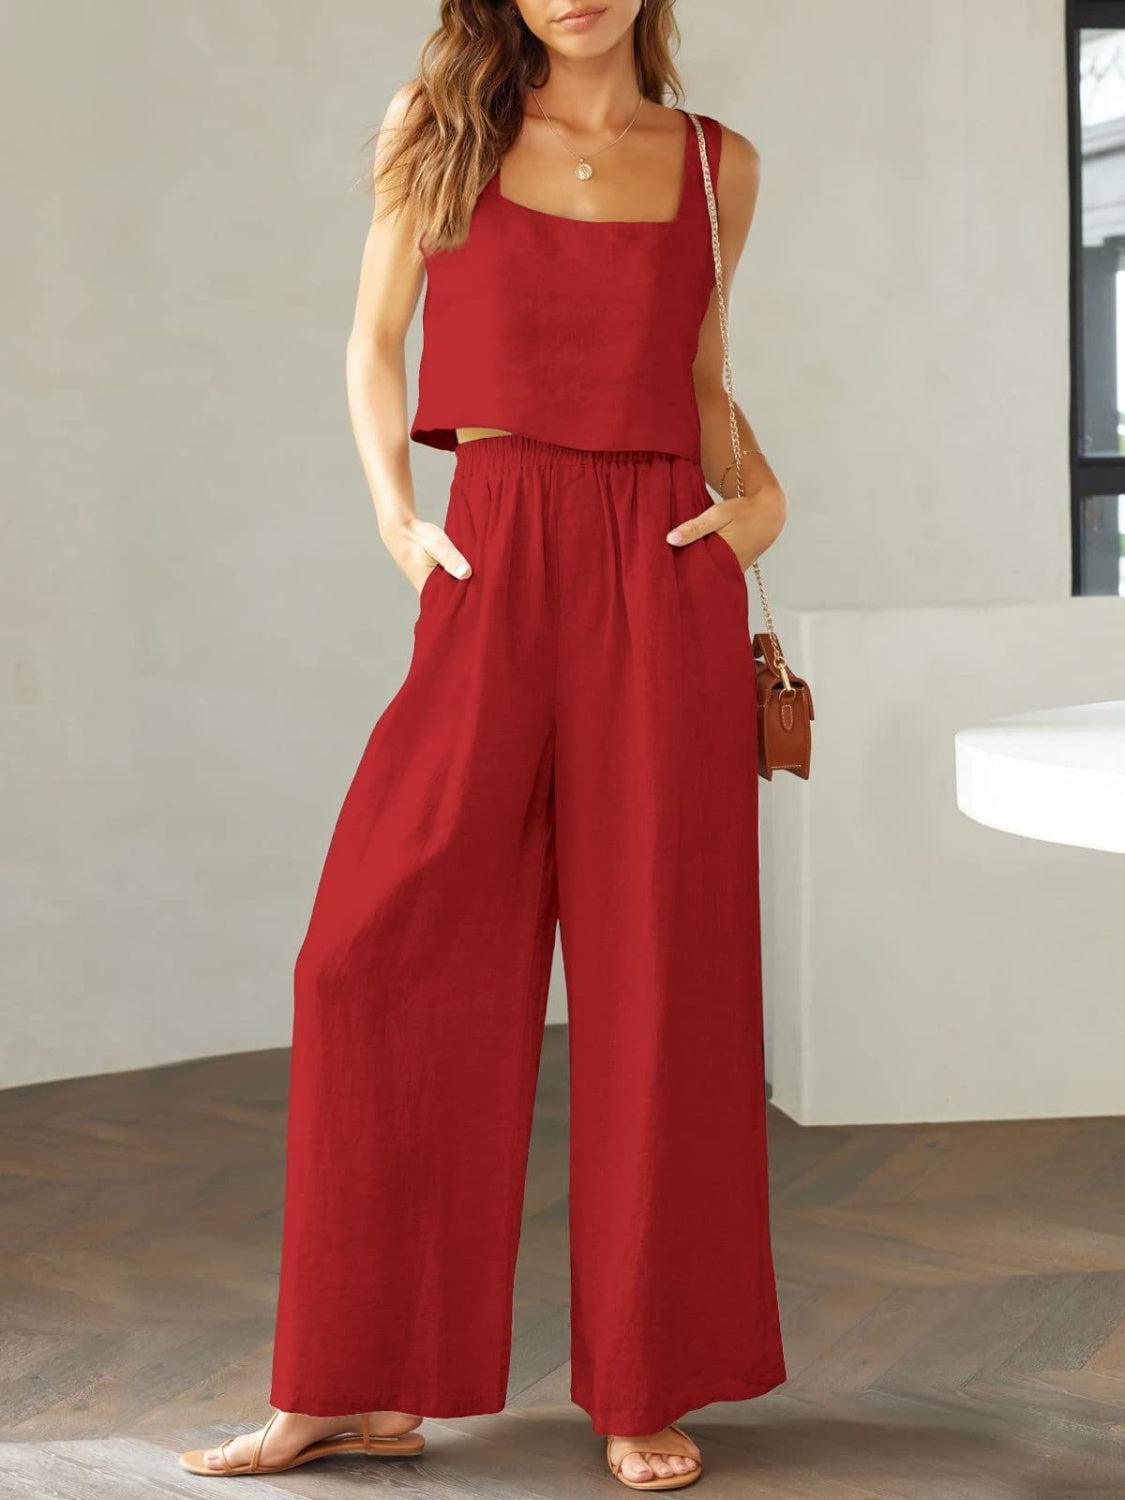 a woman in a red top and wide legged pants